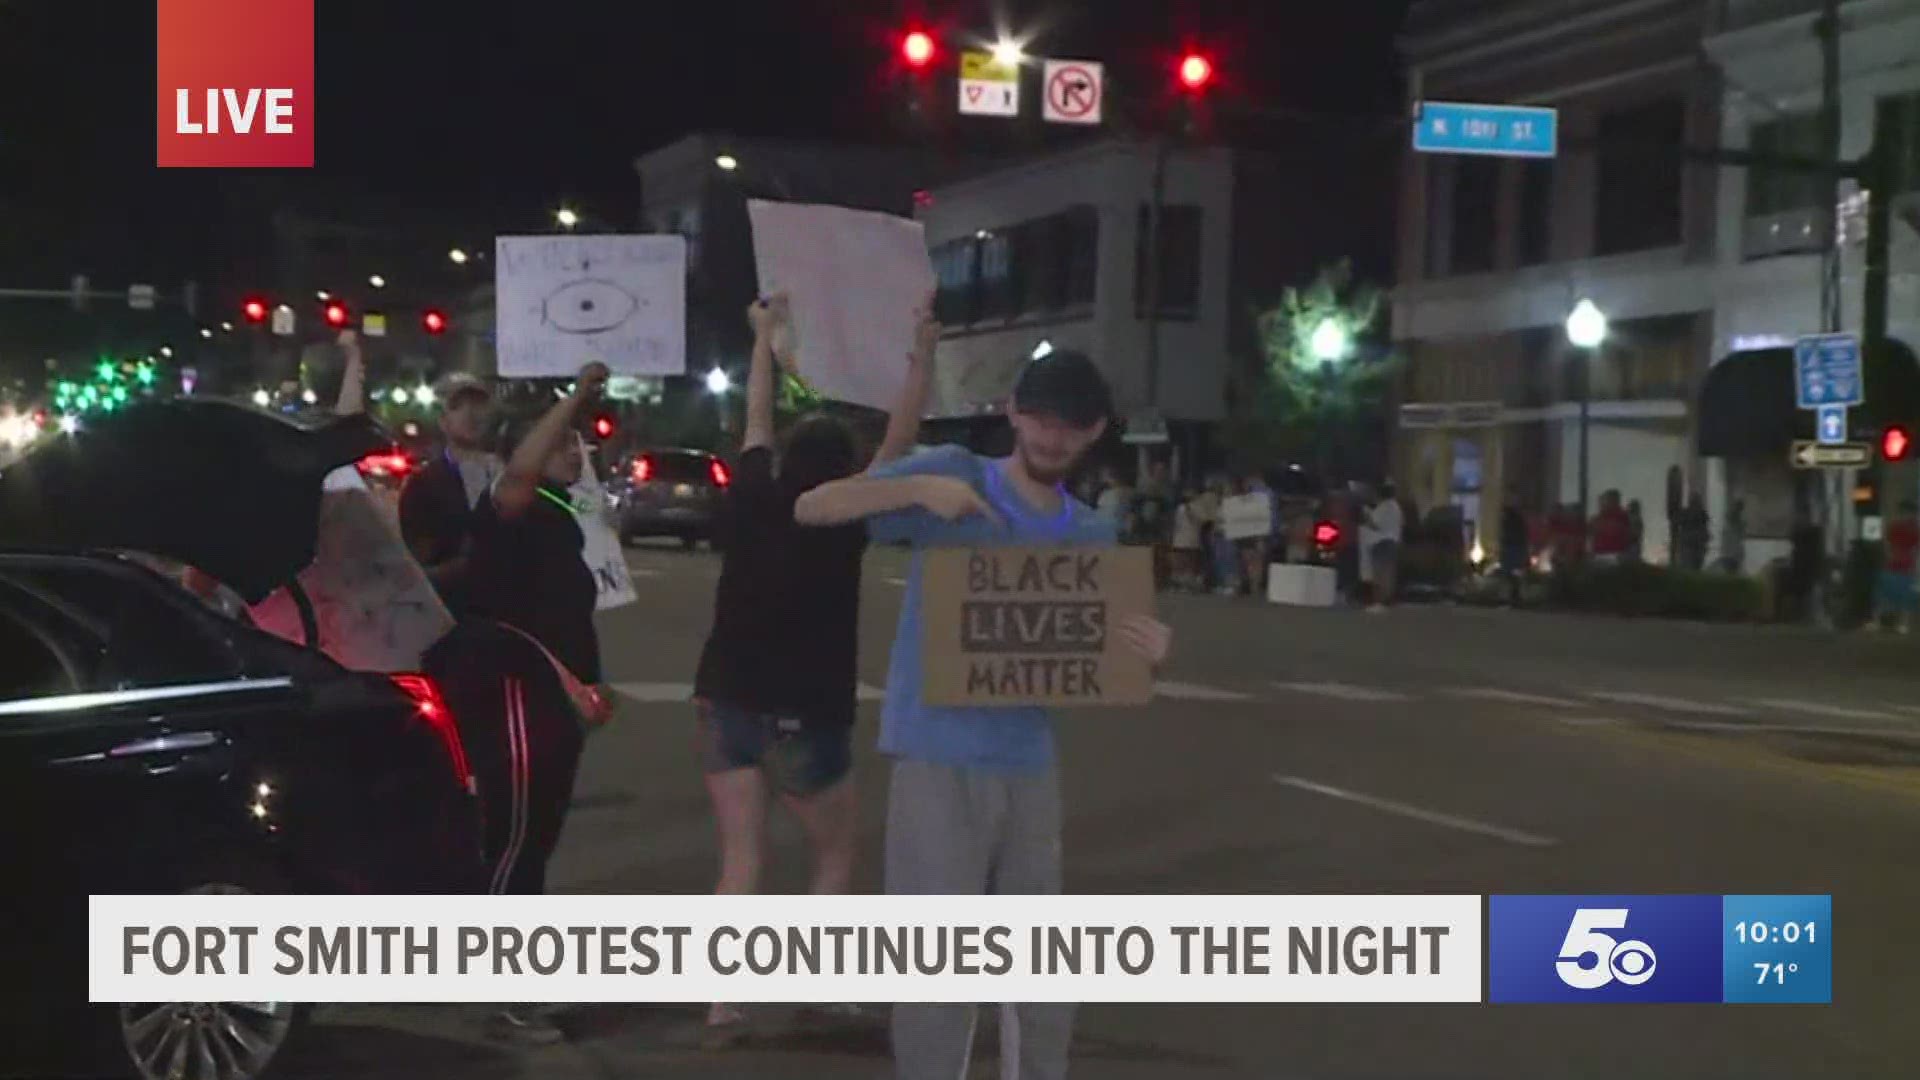 Fort Smith protest continues into the night.